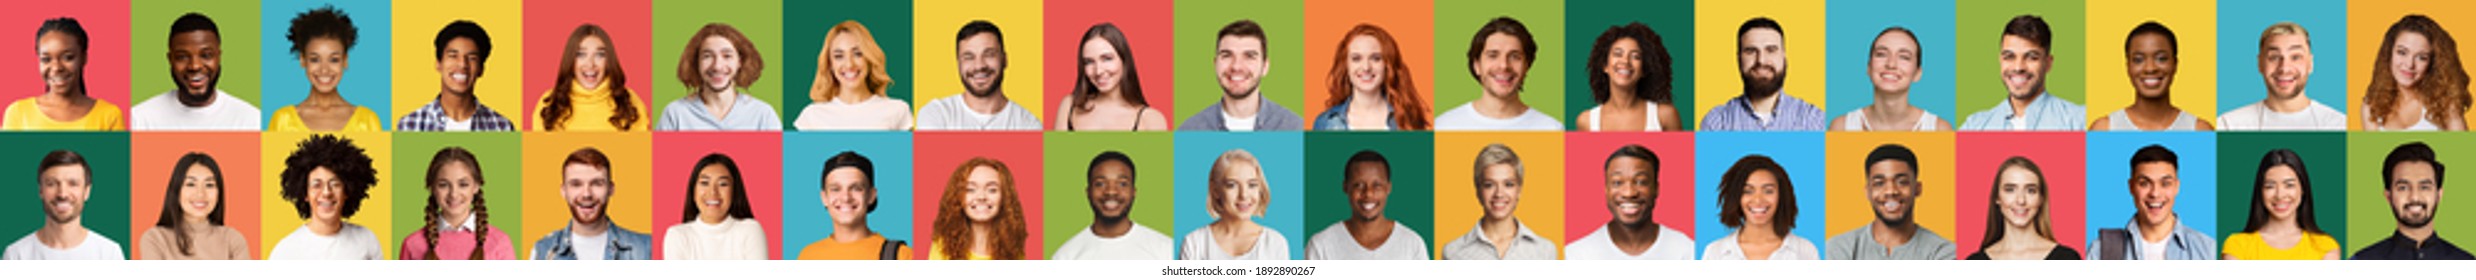 Set Of Human Faces With Various Diverse People Headshots And Portraits Of Smiling Women And Men Posing On Different Bright Colorful Backgrounds. Social Variety And Diversity. Panorama, Collage